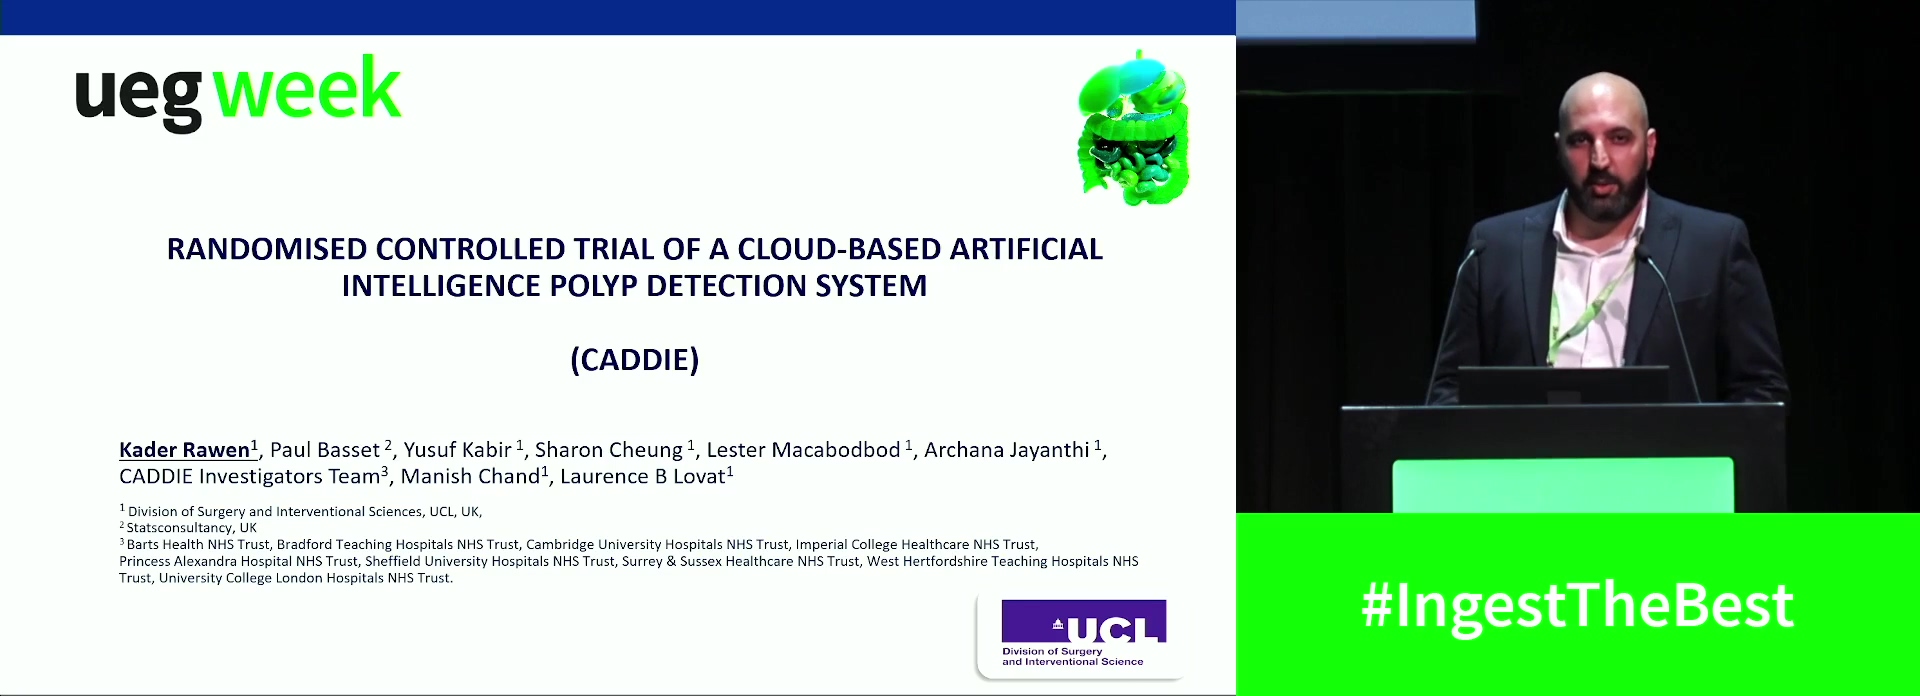 RANDOMISED CONTROLLED TRIAL OF A CLOUD-BASED ARTIFICIAL INTELLIGENCE POLYP DETECTION SYSTEM (CADDIE)